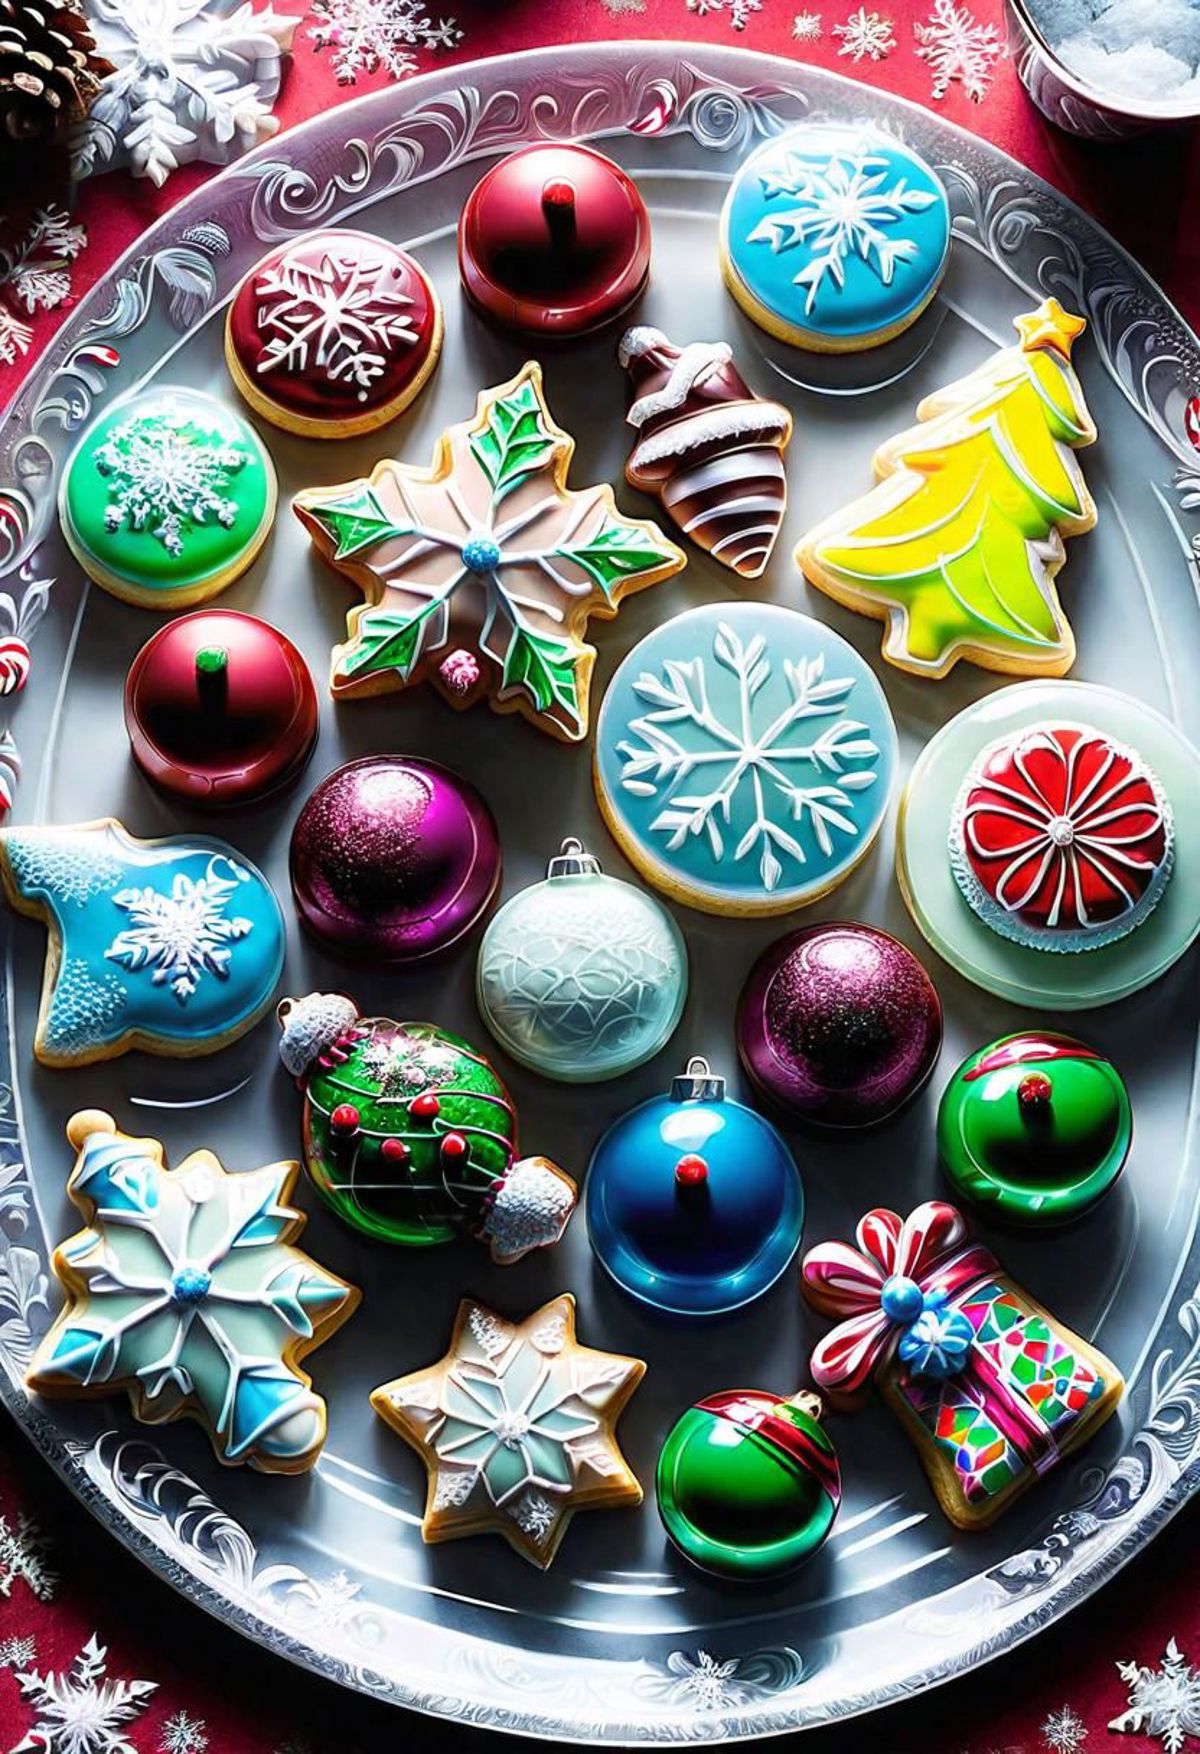 Christmas Cookie Decorations: A Plate of Decorated Cookies in the Shape of Ornaments